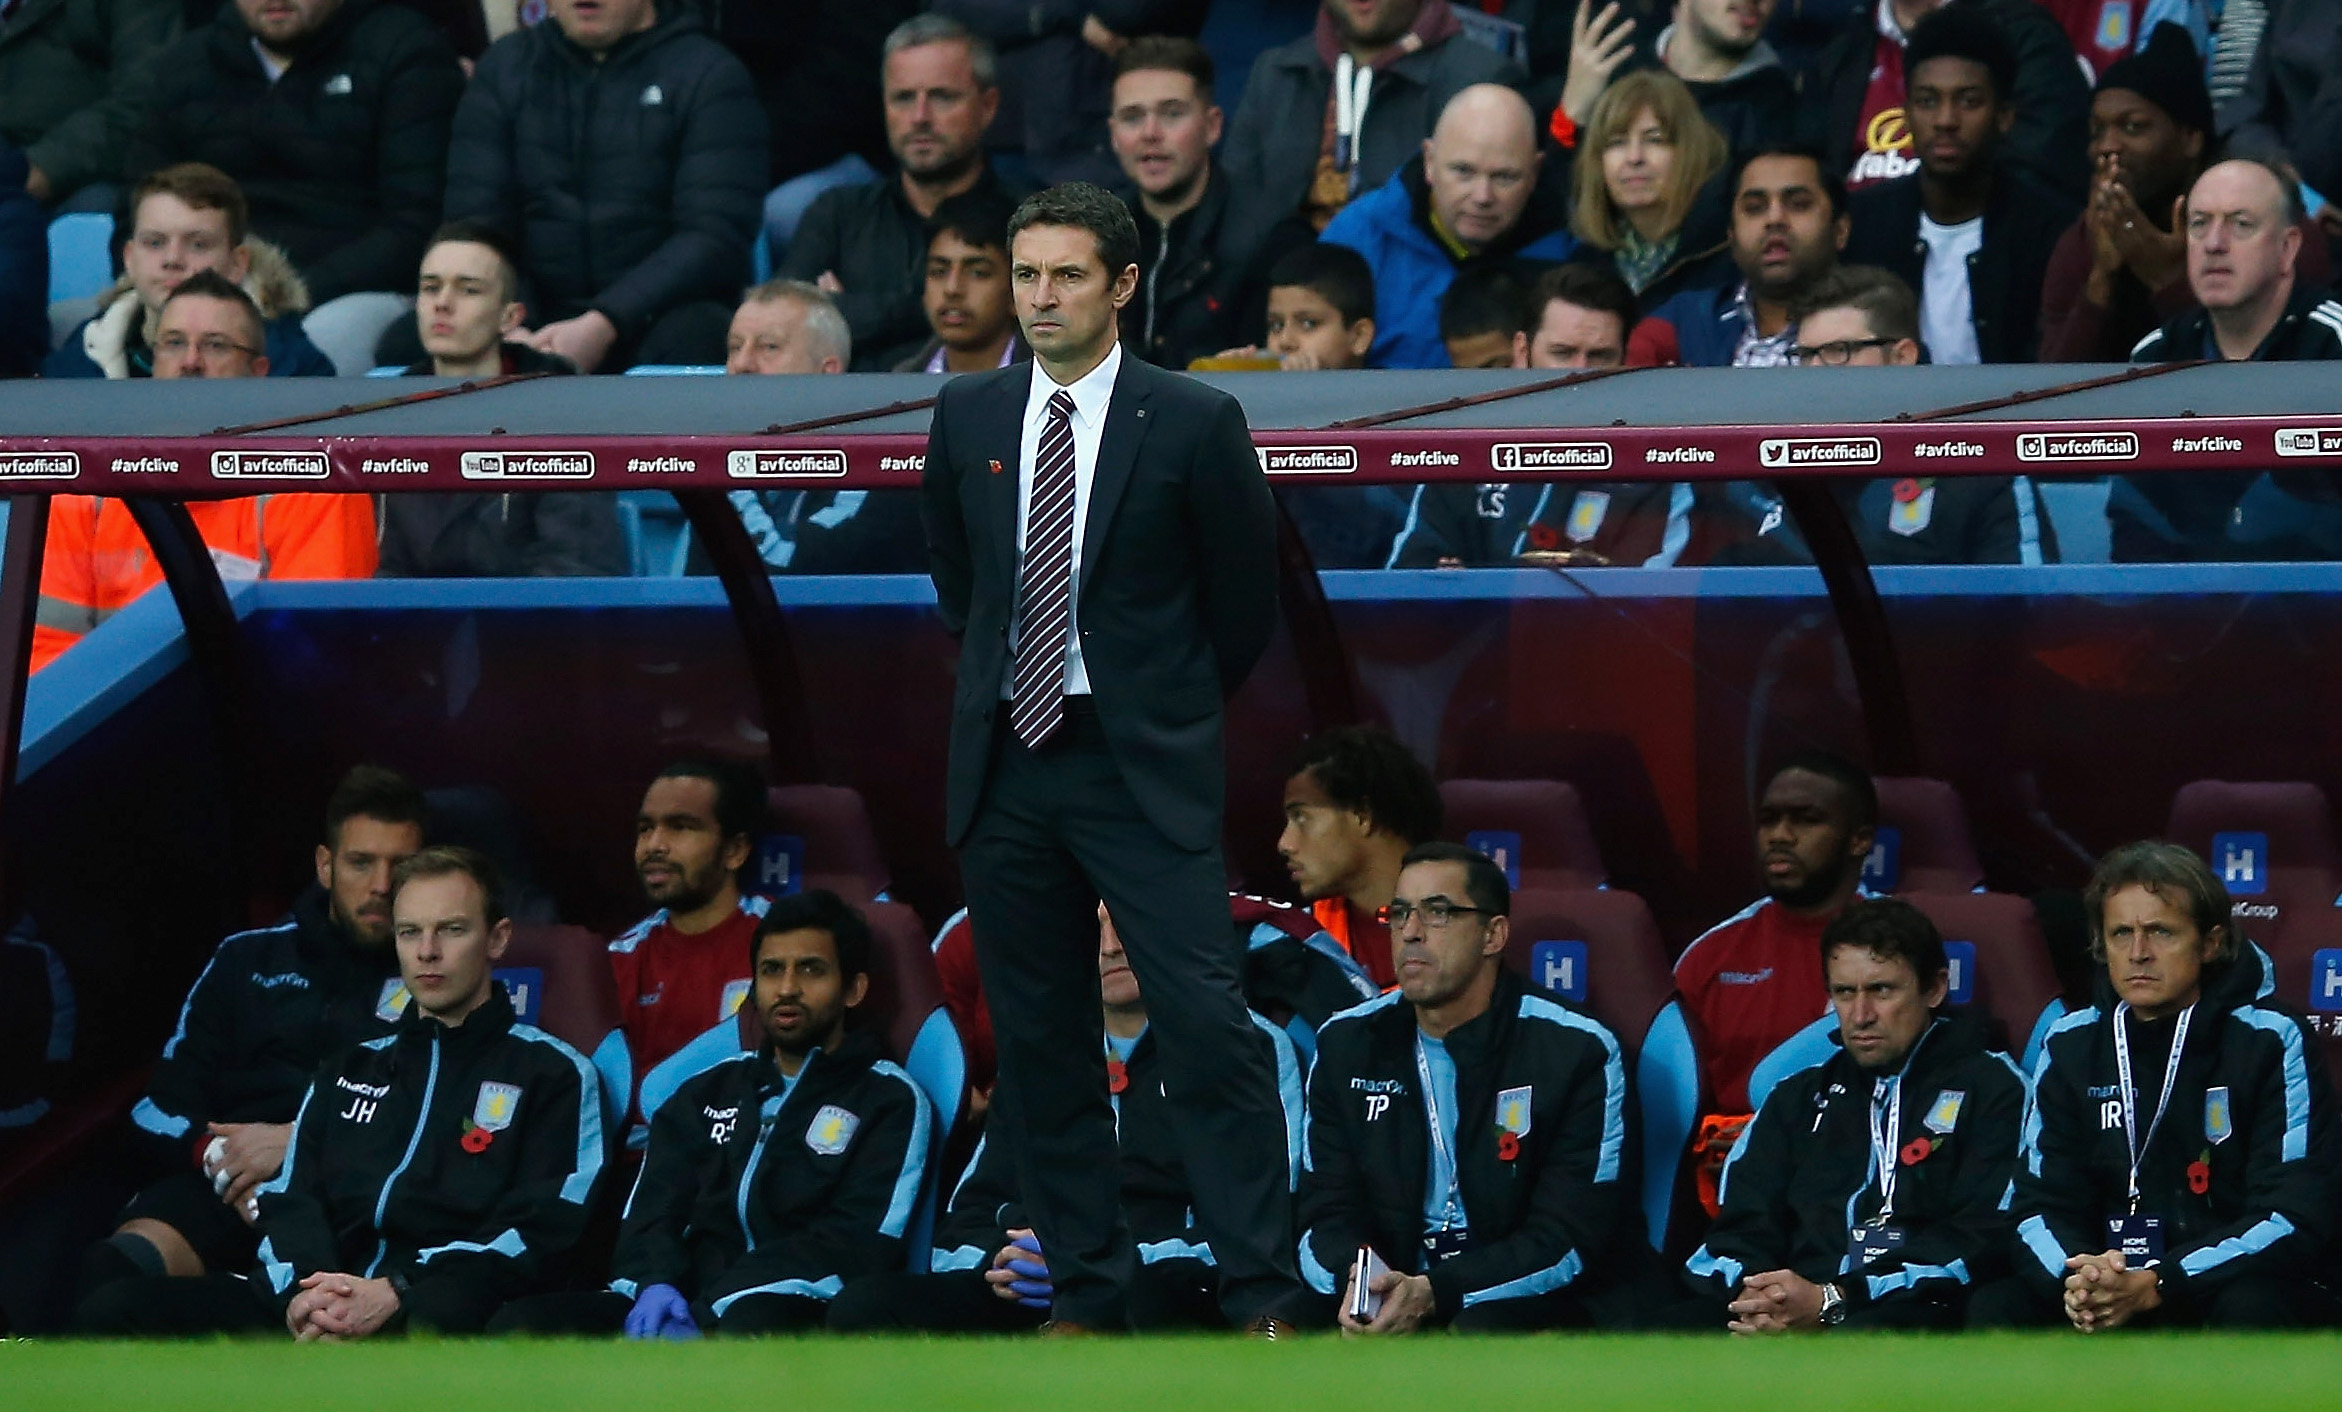 The new Villa boss got off to a great start in Week 12. Can he continue to put points on the board?